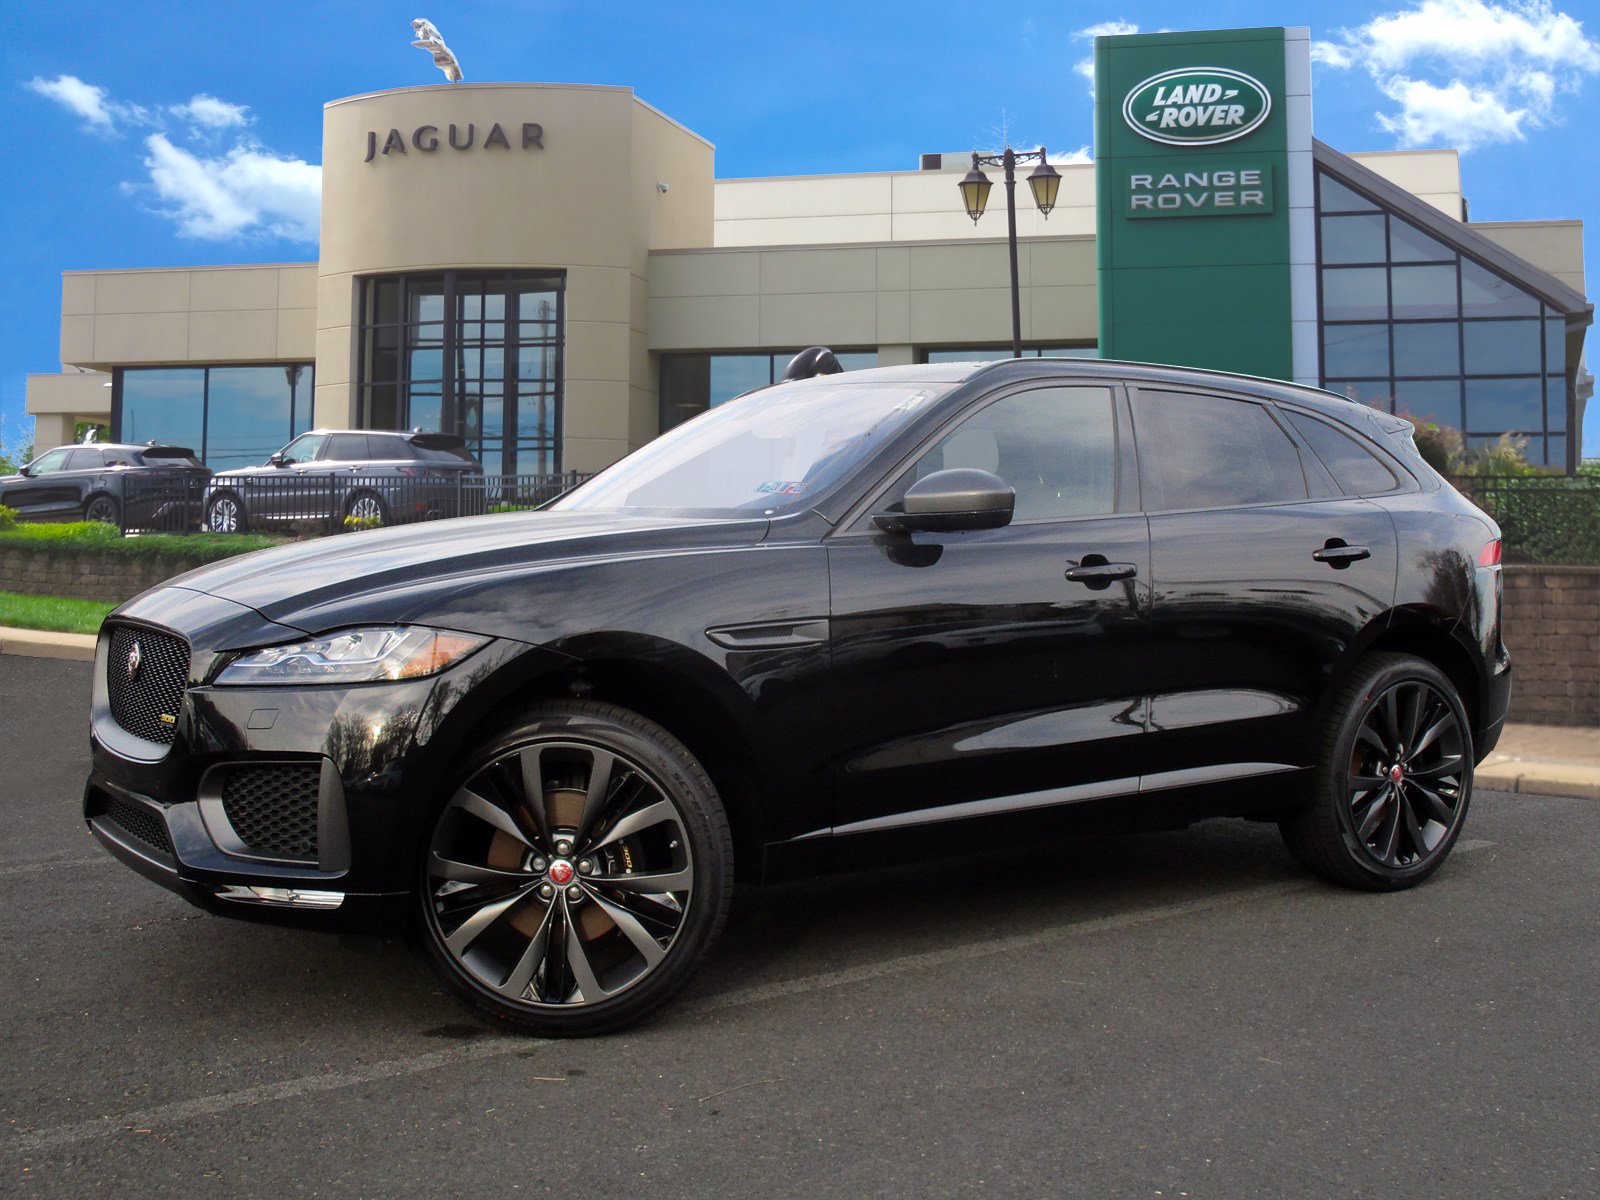 New 2020 Jaguar F Pace 300 Sport Limited Edition Sport Utility In